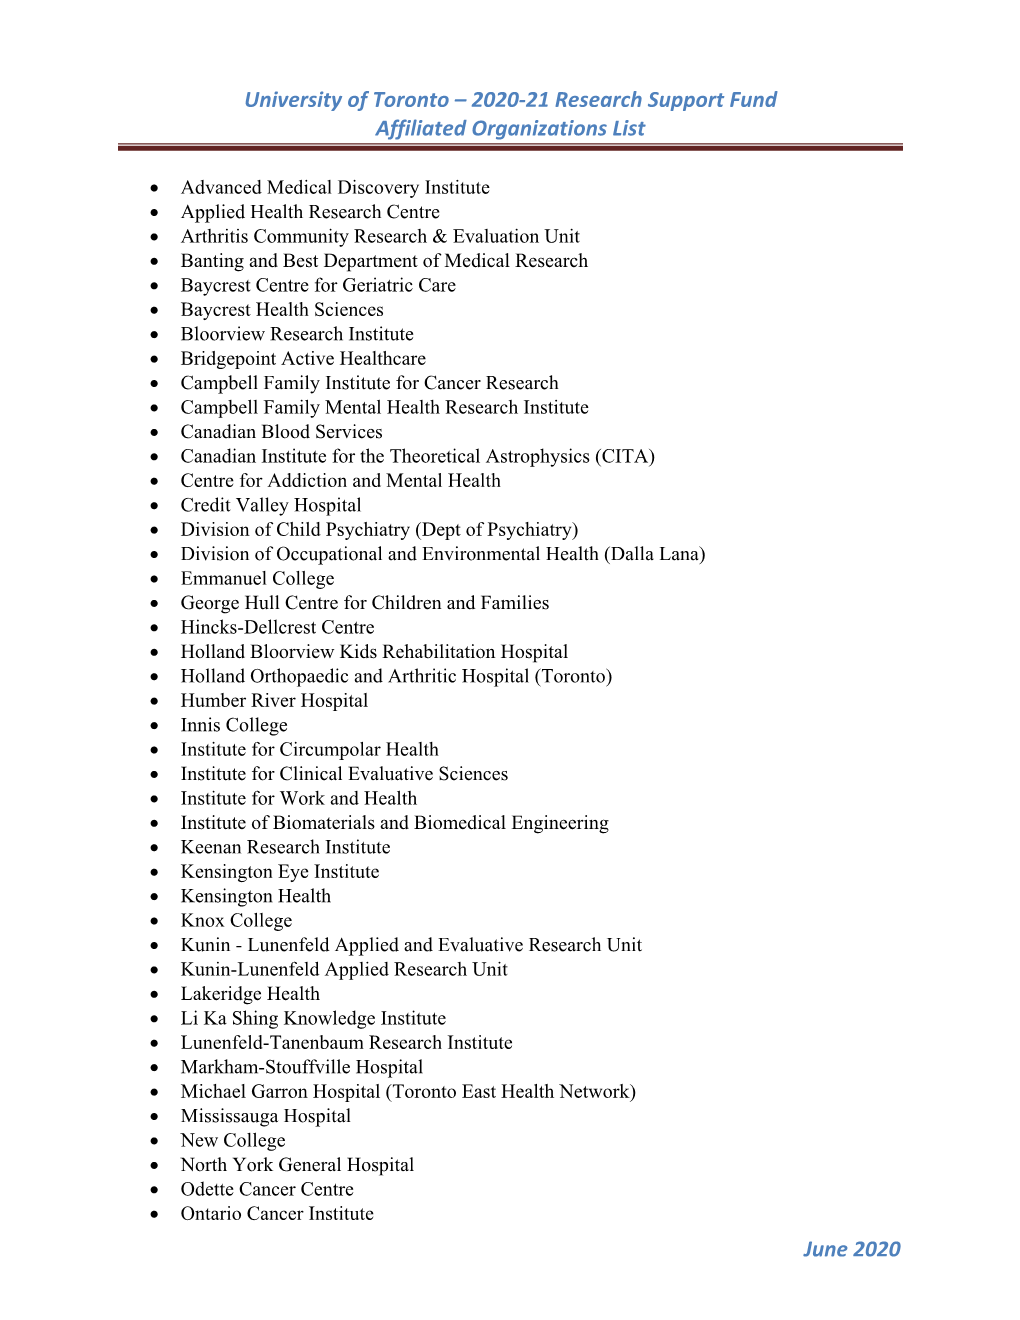 2020-21 Research Support Fund Affiliated Organizations List